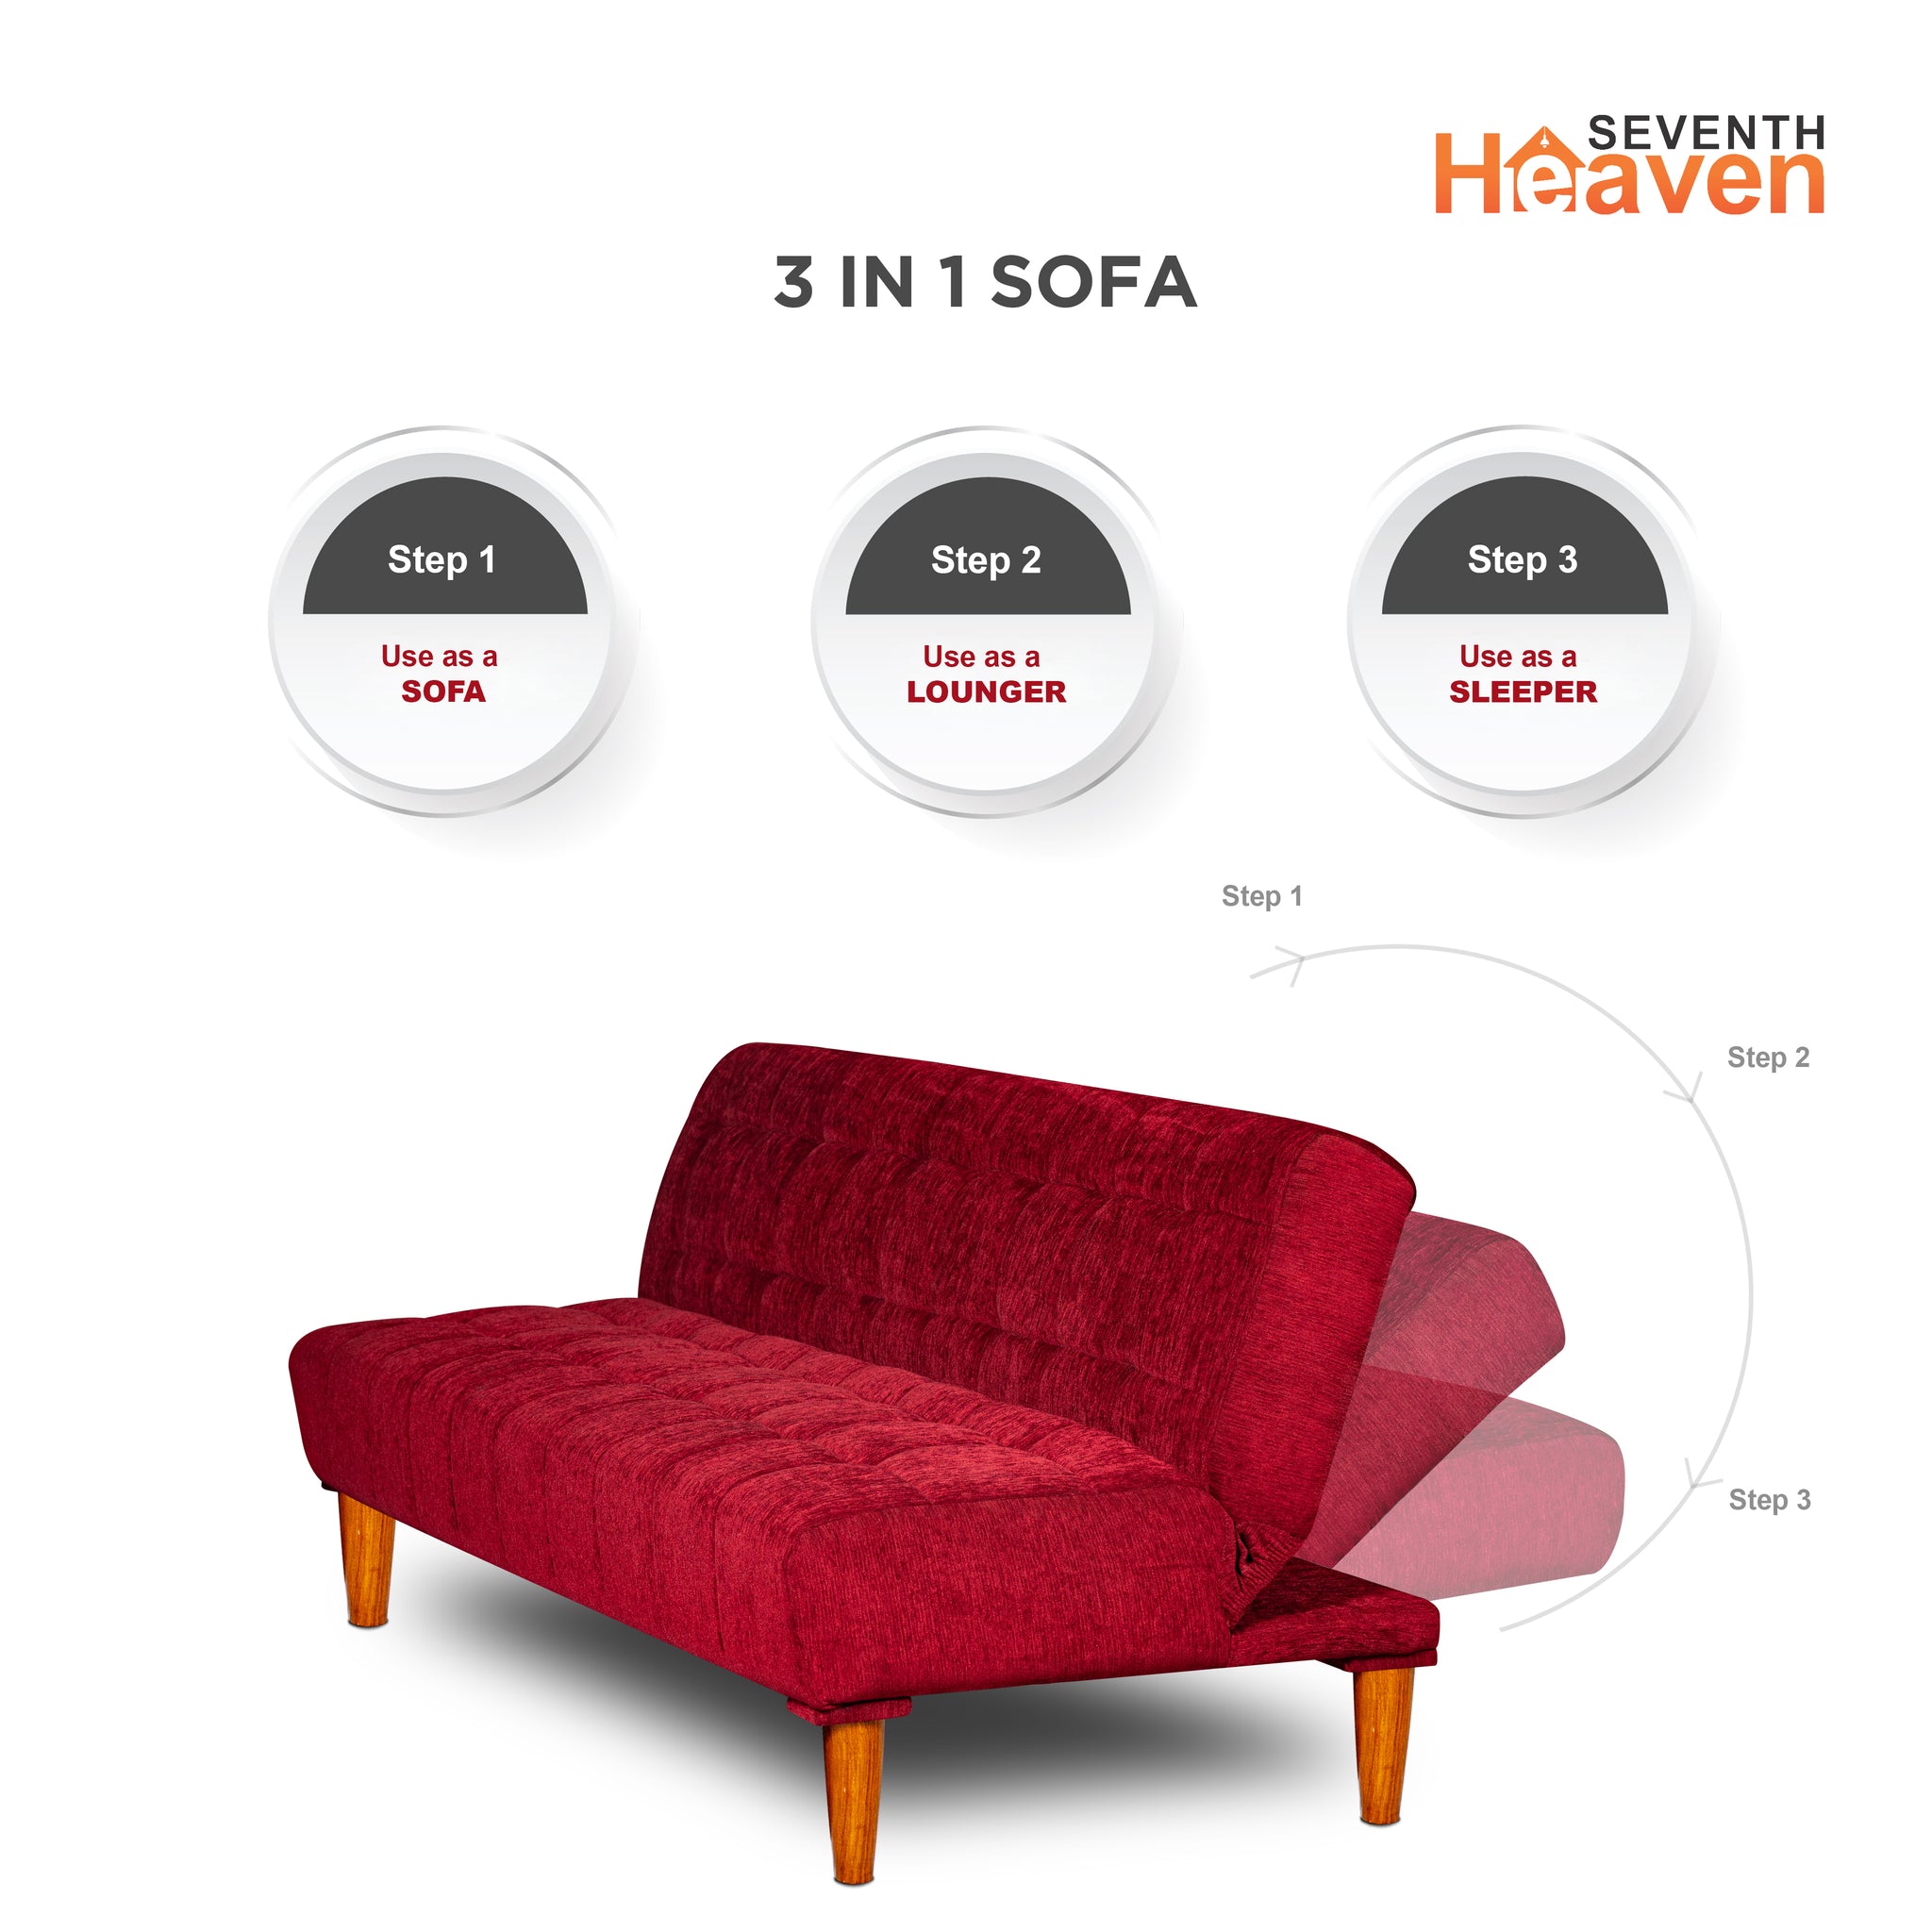 Seventh Heaven Florida Neo 4 Seater Wooden Sofa Cum Bed Modern & Elegant Smart Furniture Range for luxurious homes, living rooms and offices. Use as a sofa, lounger or bed. Perfect for guests. Molphino fabric with sheesham polished wooden legs. Maroon colour.